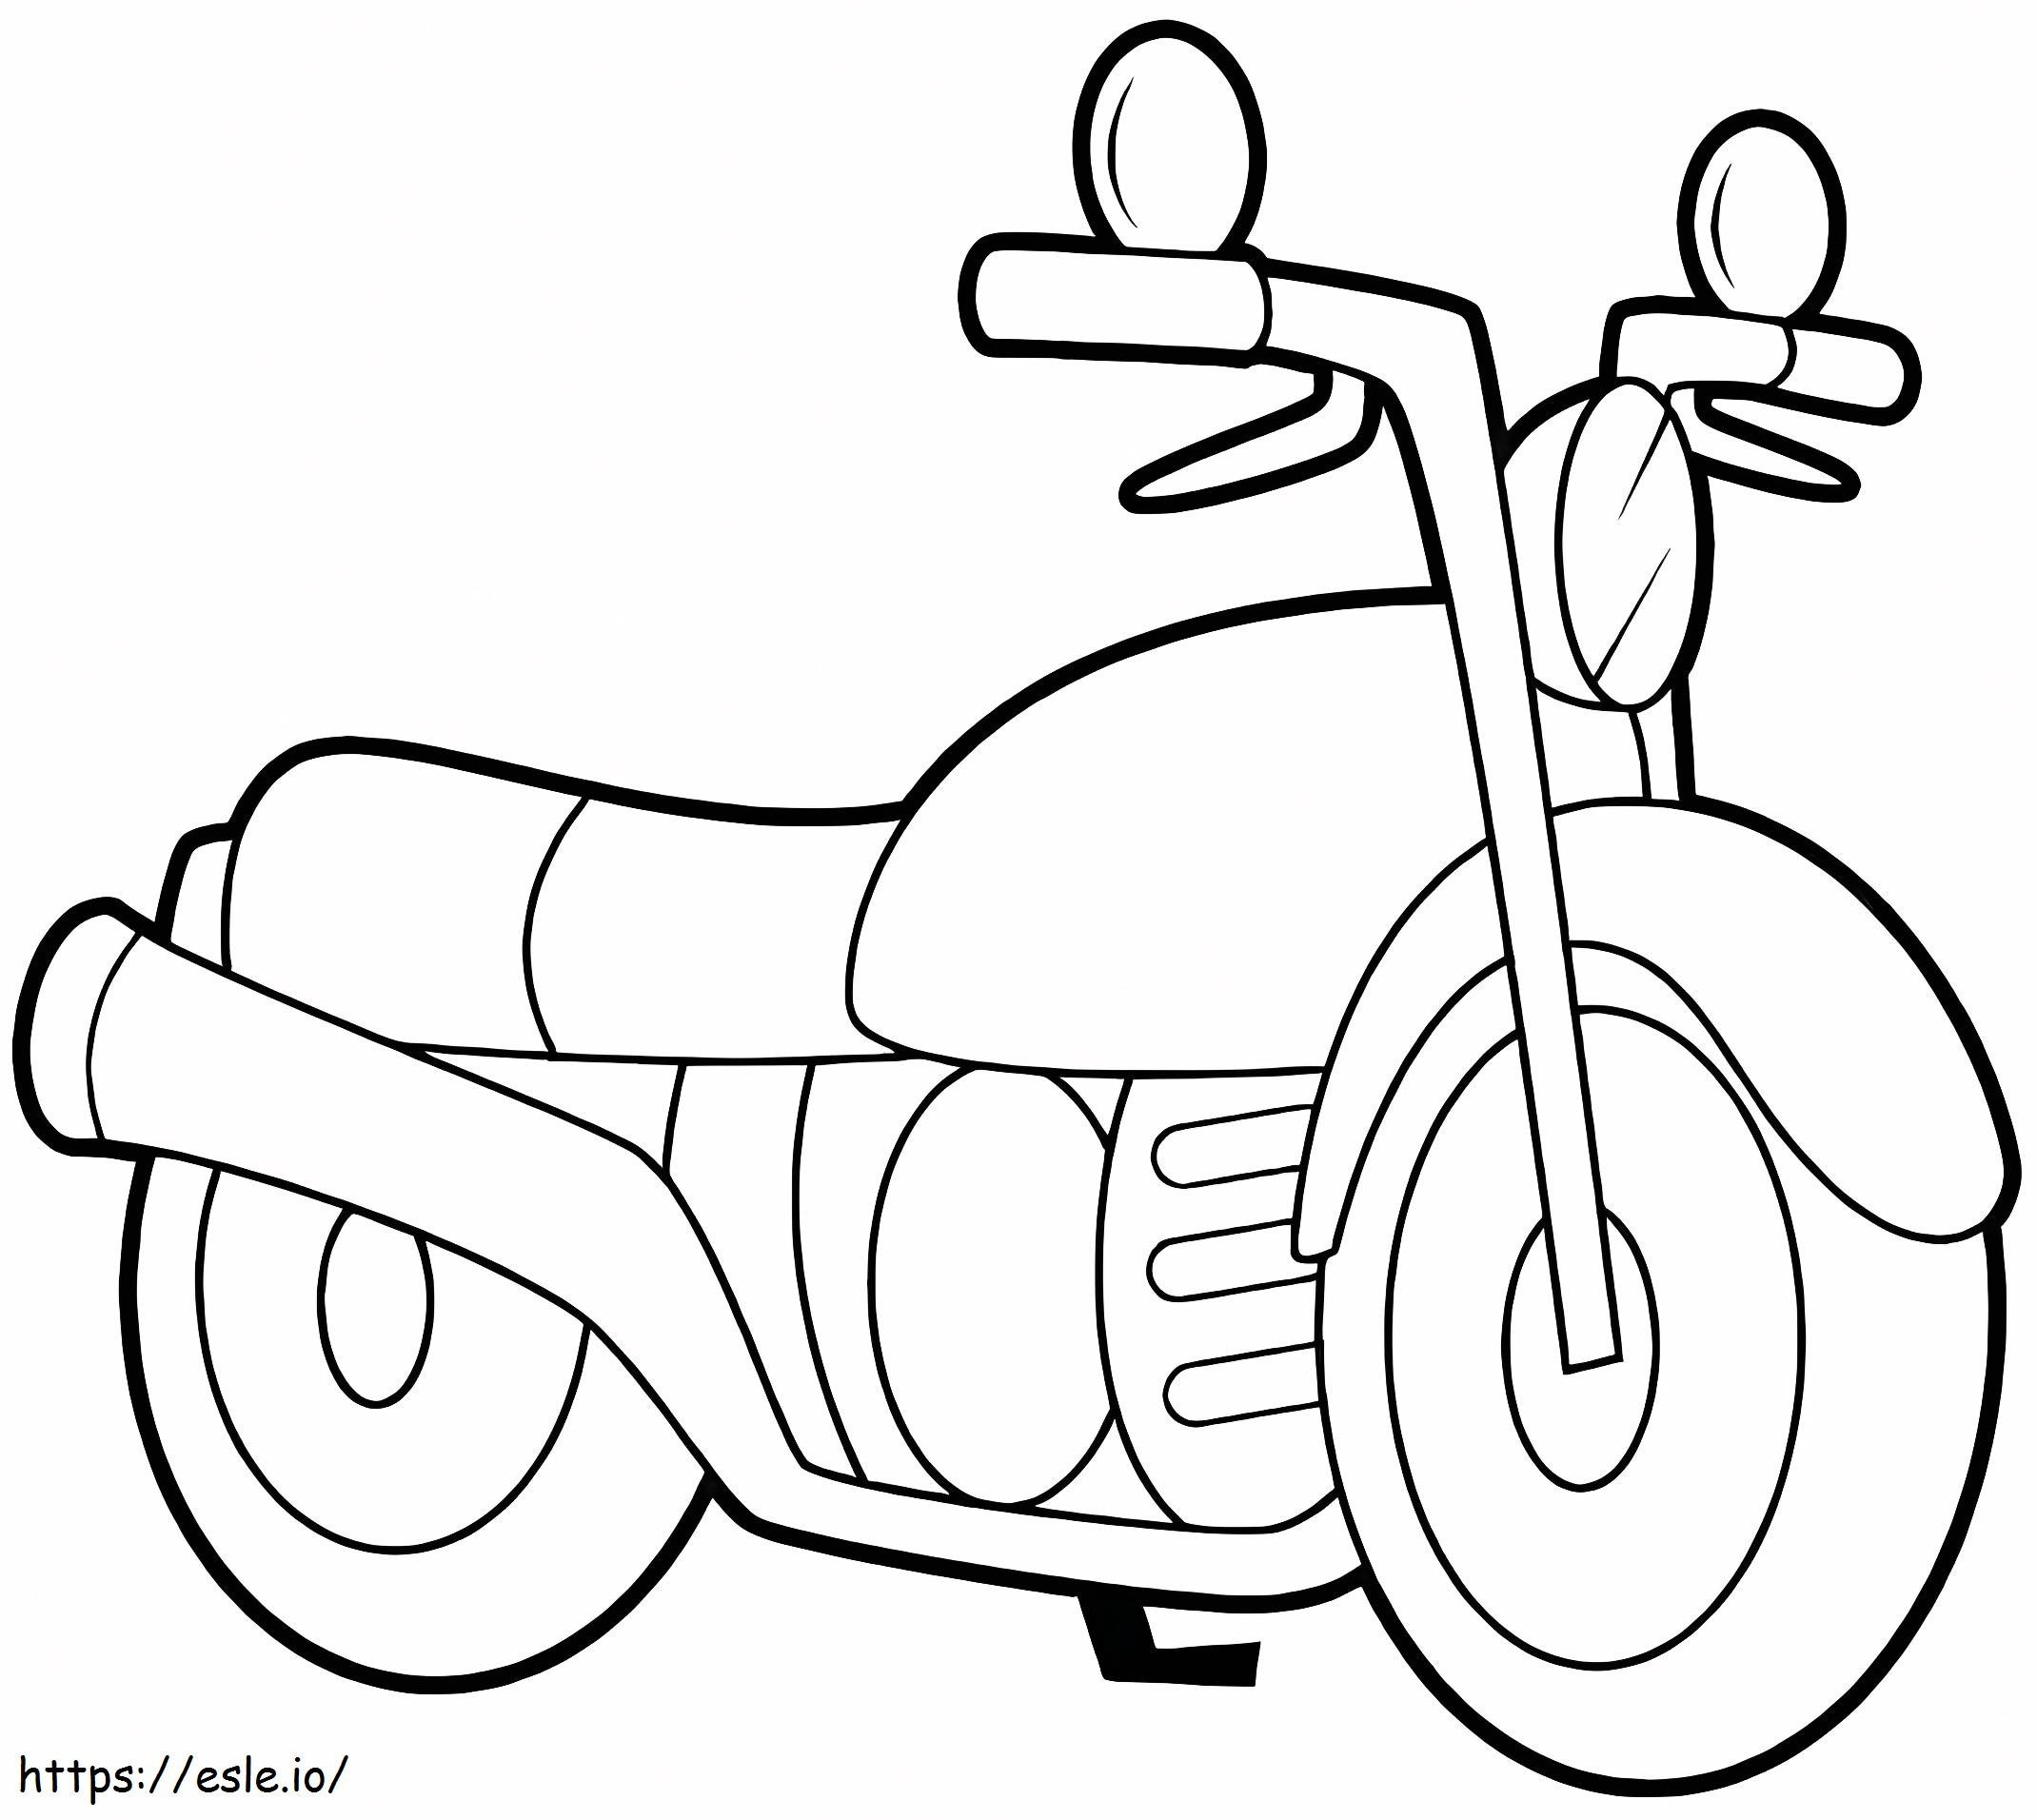 1570784024 Transport Colouring Page Sea Transport Colouring Pages Vehicle Coloring Transport For Toddlers coloring page